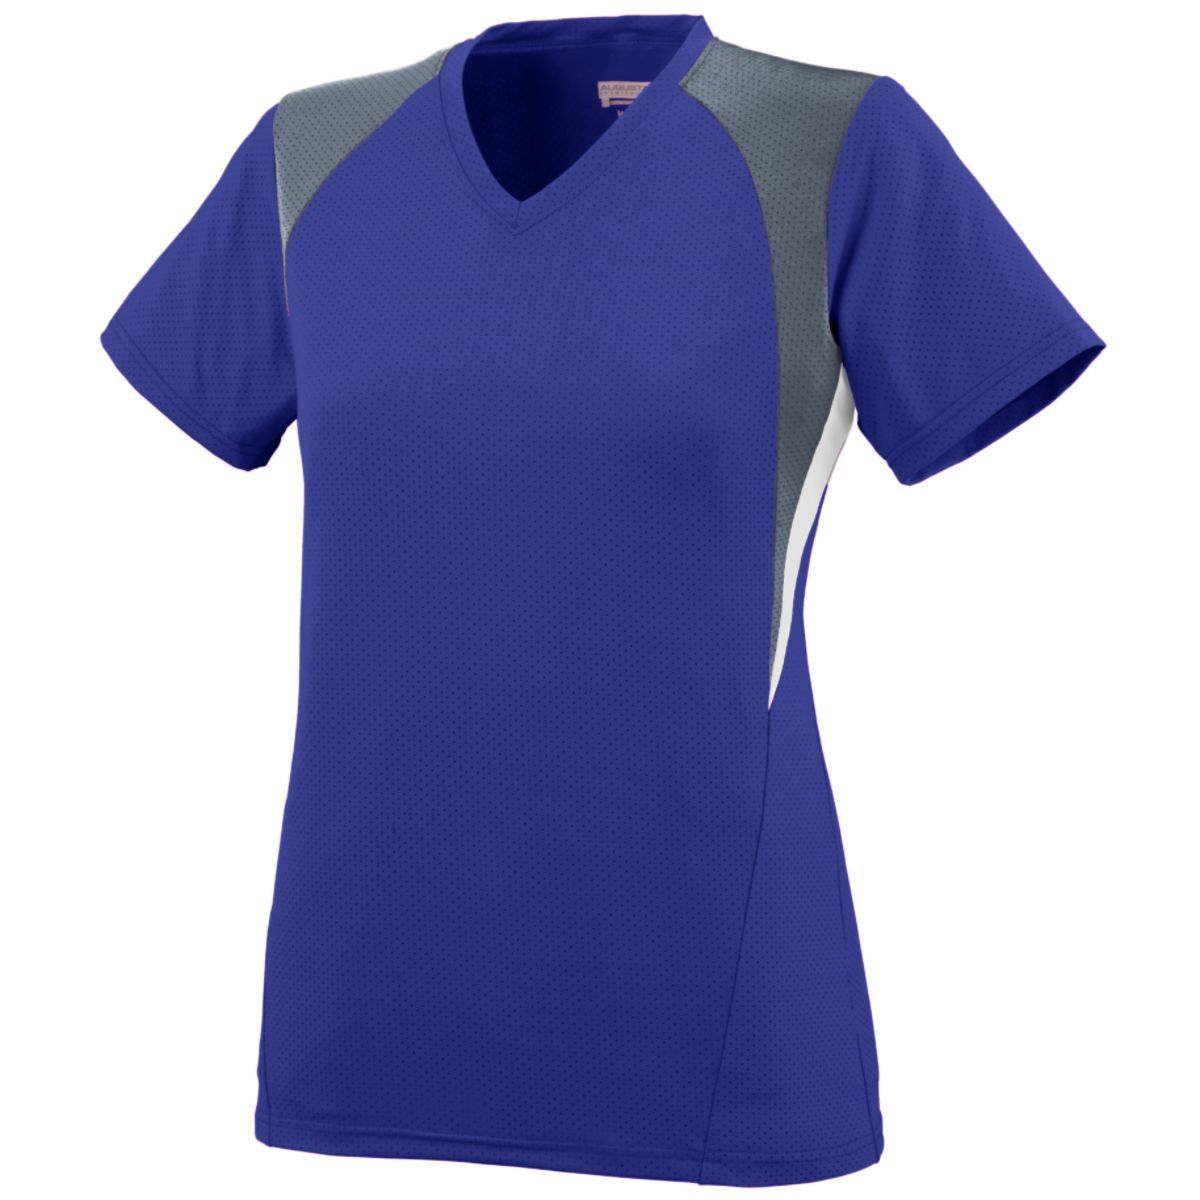 Augusta Sportswear Girls Mystic Jersey in Purple/Graphite/White  -Part of the Girls, Augusta-Products, Soccer, Girls-Jersey, Shirts, All-Sports-1 product lines at KanaleyCreations.com